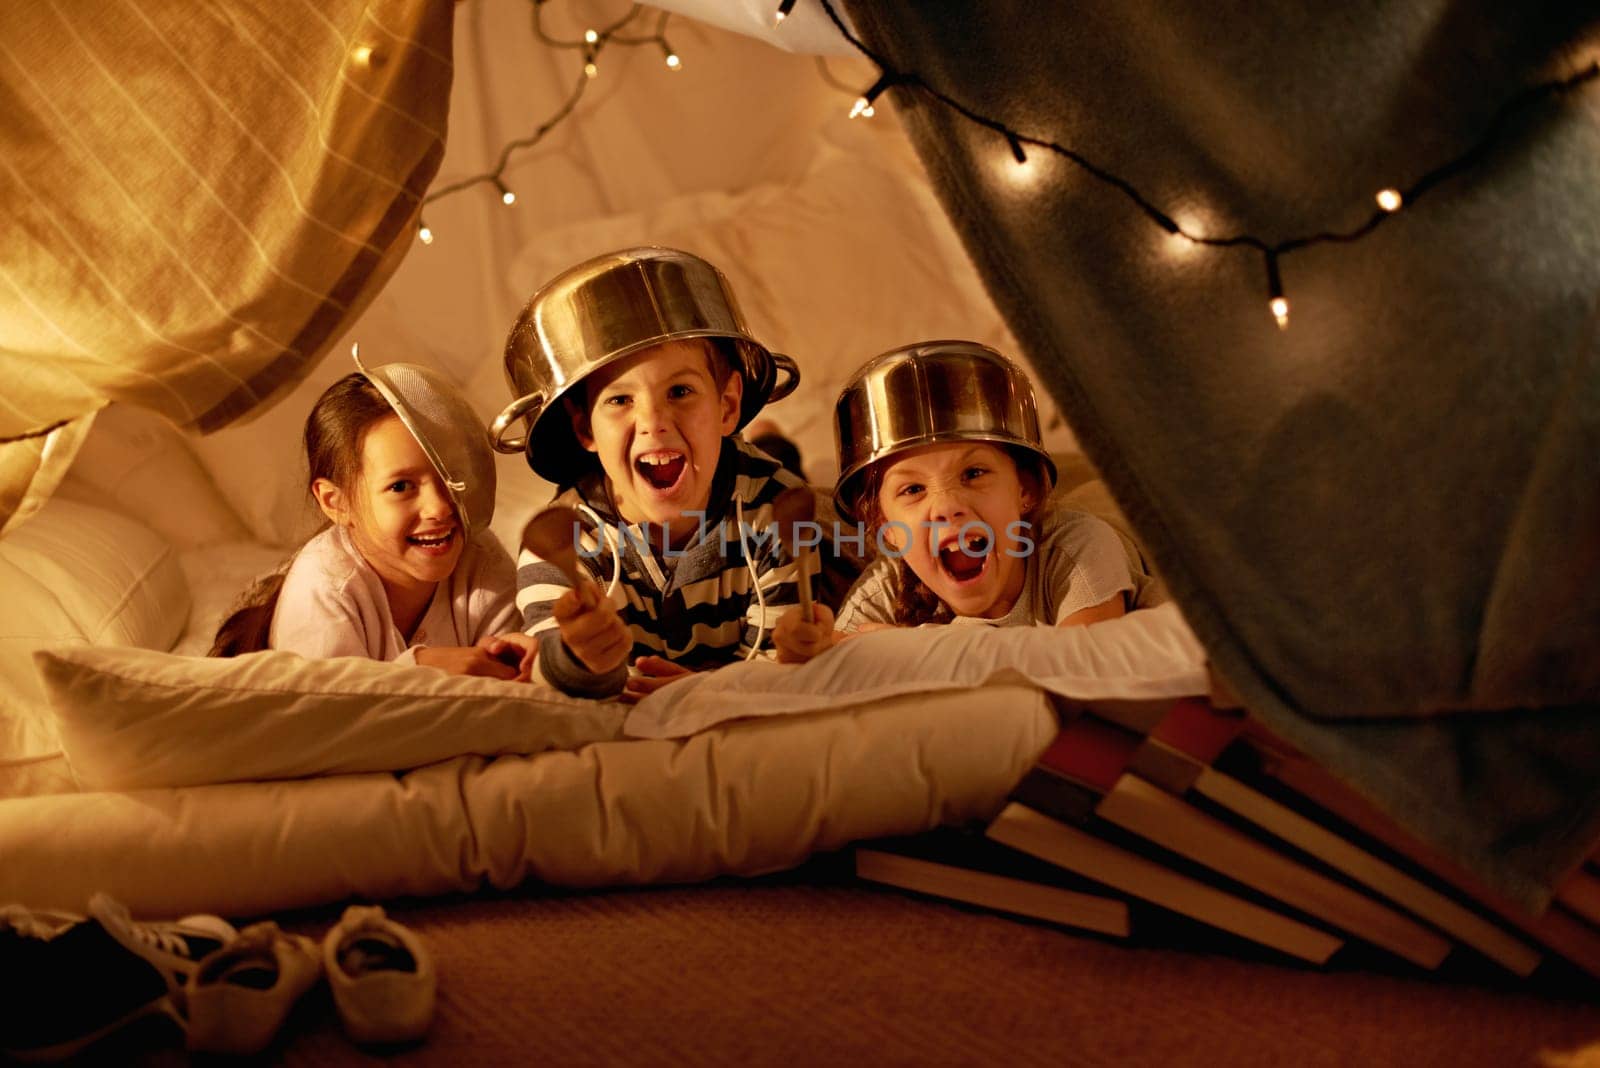 Tent, lights and portrait of children at night in bedroom for playing, fun and bonding at home. Friends, youth and happy kids with spoon, helmet pots and blanket fort for games, relax and childhood.